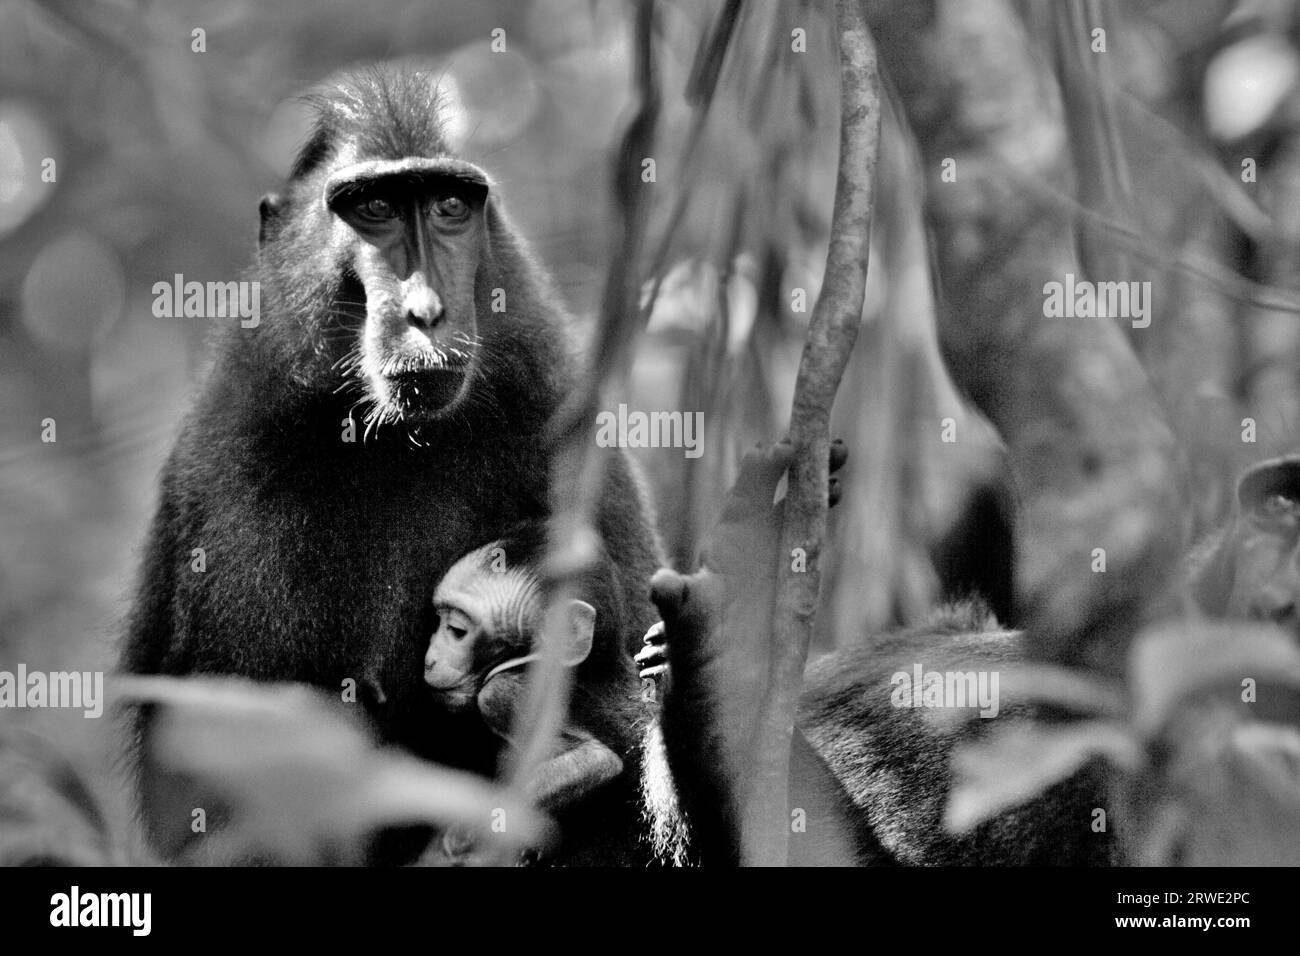 A crested macaque (Macaca nigra) takes care of an offspring in Tangkoko Nature Reserve, North Sulawesi, Indonesia. A recent report by a team of scientists led by Marine Joly revealed that the temperature is increasing in Tangkoko forest, and the overall fruit abundance decreased. 'Between 2012 and 2020, temperatures increased by up to 0.2 degree Celsius per year in the forest, and the overall fruit abundance decreased by 1 percent per year,” they wrote on International Journal of Primatology. 'In a warmer future, they would have to adjust, resting and staying in the shade during the ... Stock Photo